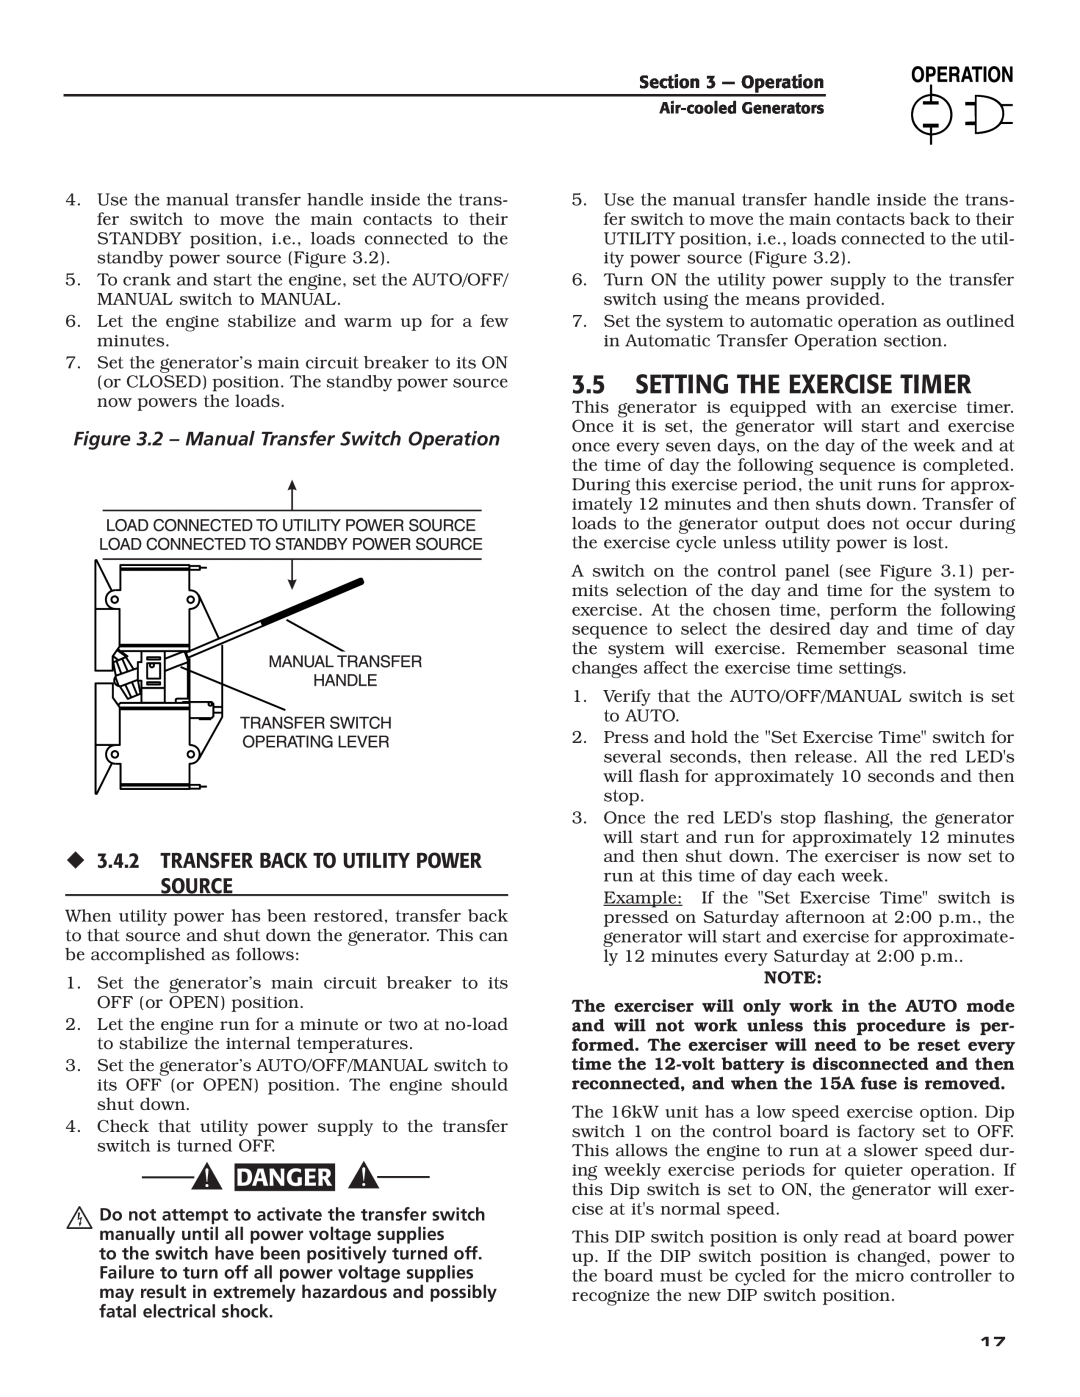 Generac Power Systems 5253 Setting The Exercise Timer, ‹ 3.4.2 TRANSFER BACK TO UTILITY POWER SOURCE, Danger, Operation 